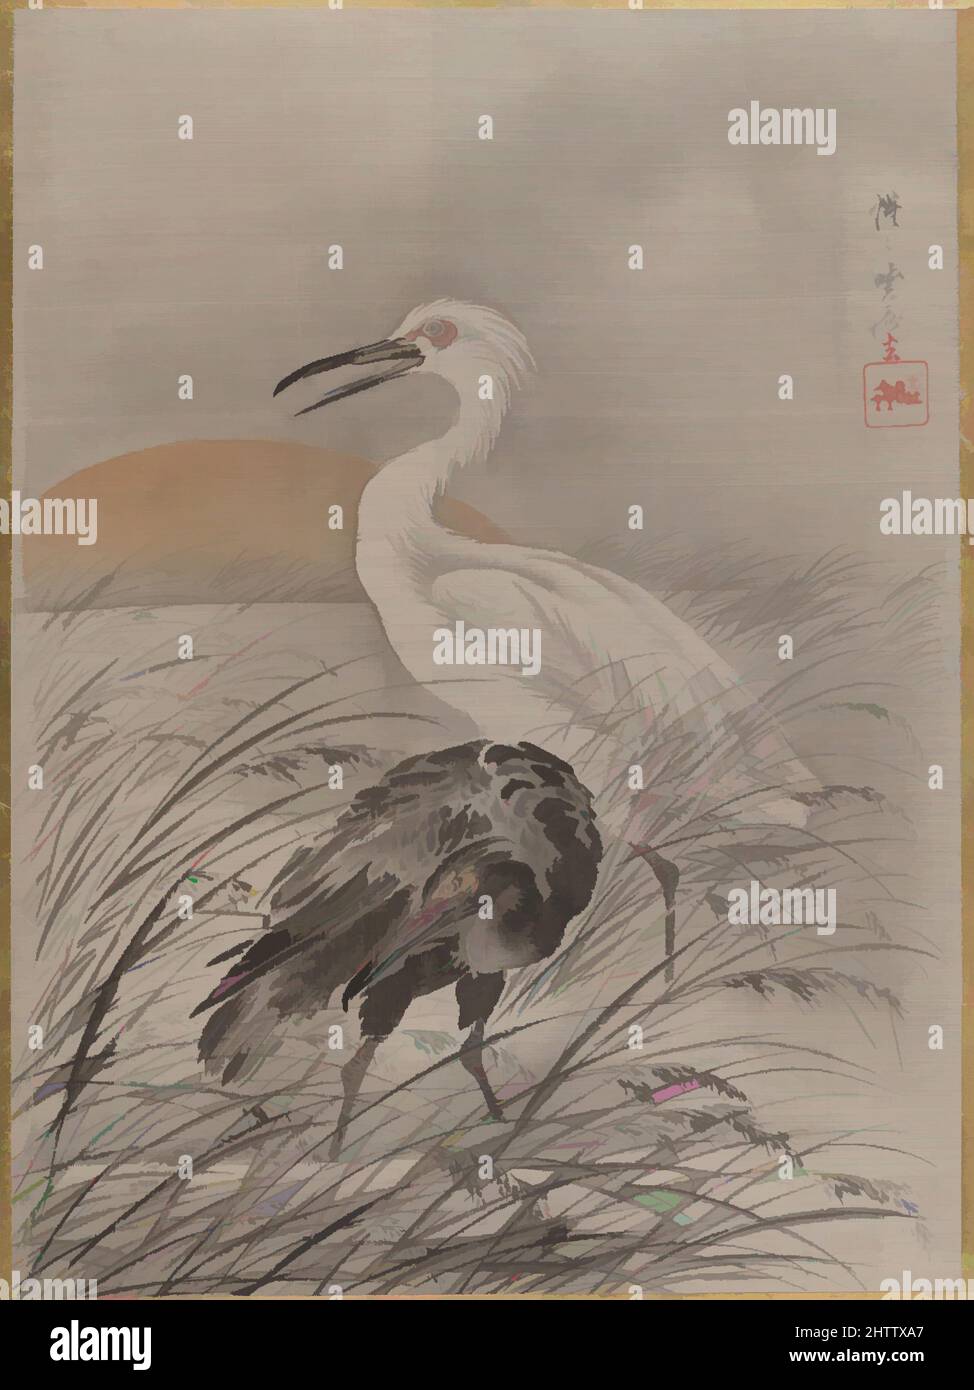 Art inspired by Cranes in Marsh, Meiji period (1868–1912), ca. 1887, Japan, Album leaf; ink and color on silk, 14 1/4 x 10 1/2 in. (36.2 x 26.7 cm), Paintings, Kawanabe Kyōsai (Japanese, 1831–1889, Classic works modernized by Artotop with a splash of modernity. Shapes, color and value, eye-catching visual impact on art. Emotions through freedom of artworks in a contemporary way. A timeless message pursuing a wildly creative new direction. Artists turning to the digital medium and creating the Artotop NFT Stock Photo